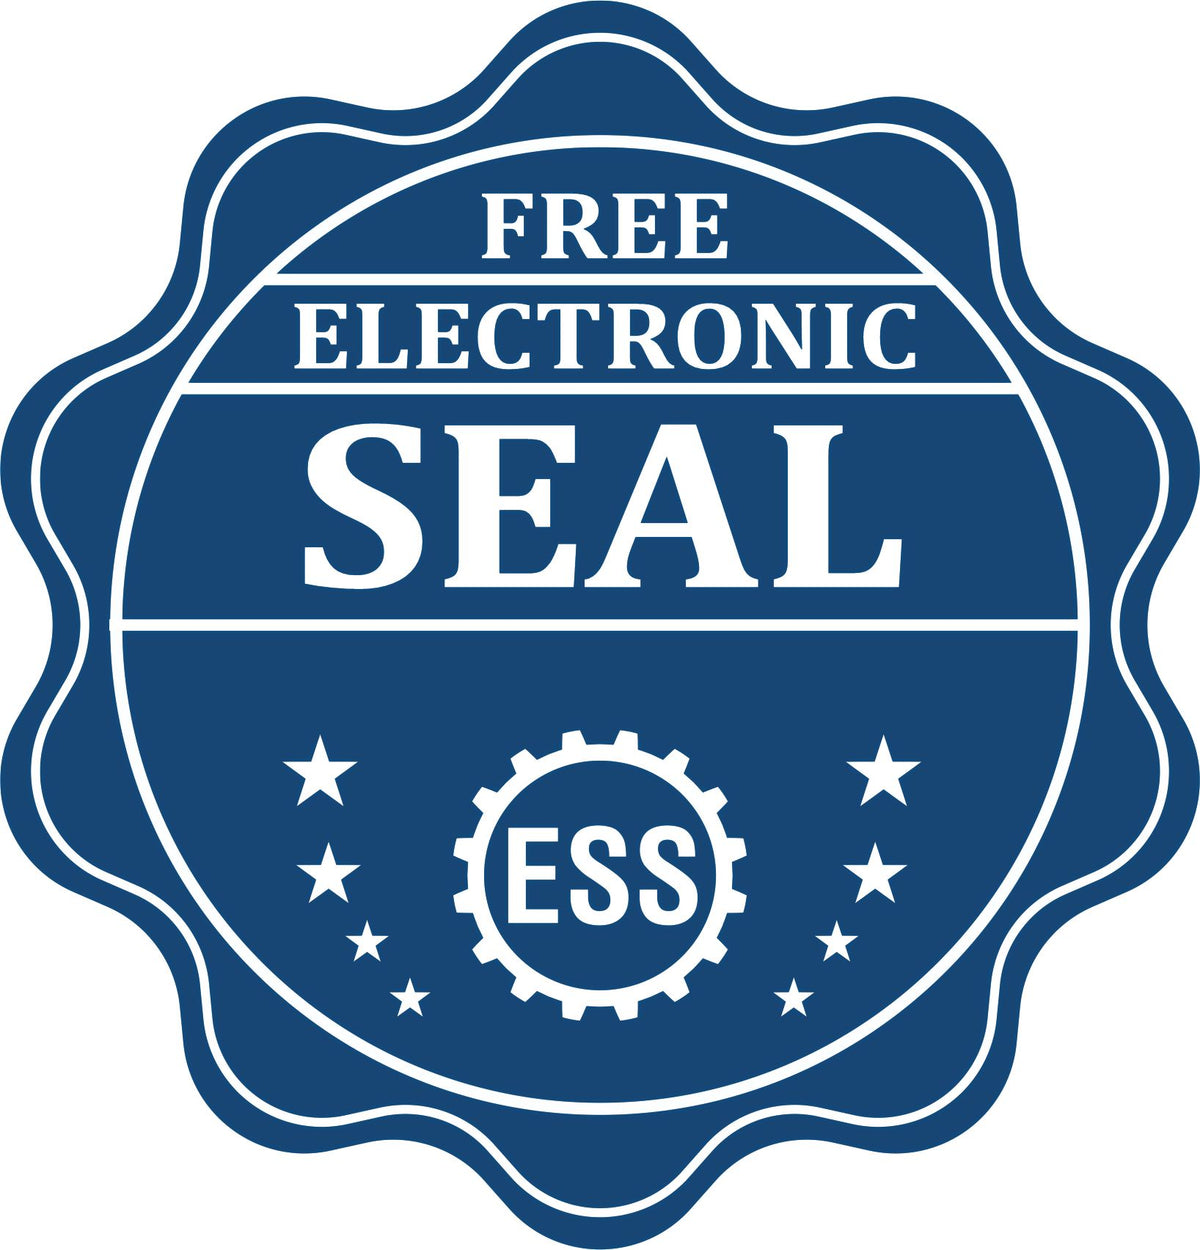 A badge showing a free electronic seal for the Soft Nebraska Professional Engineer Seal with stars and the ESS gear on the emblem.